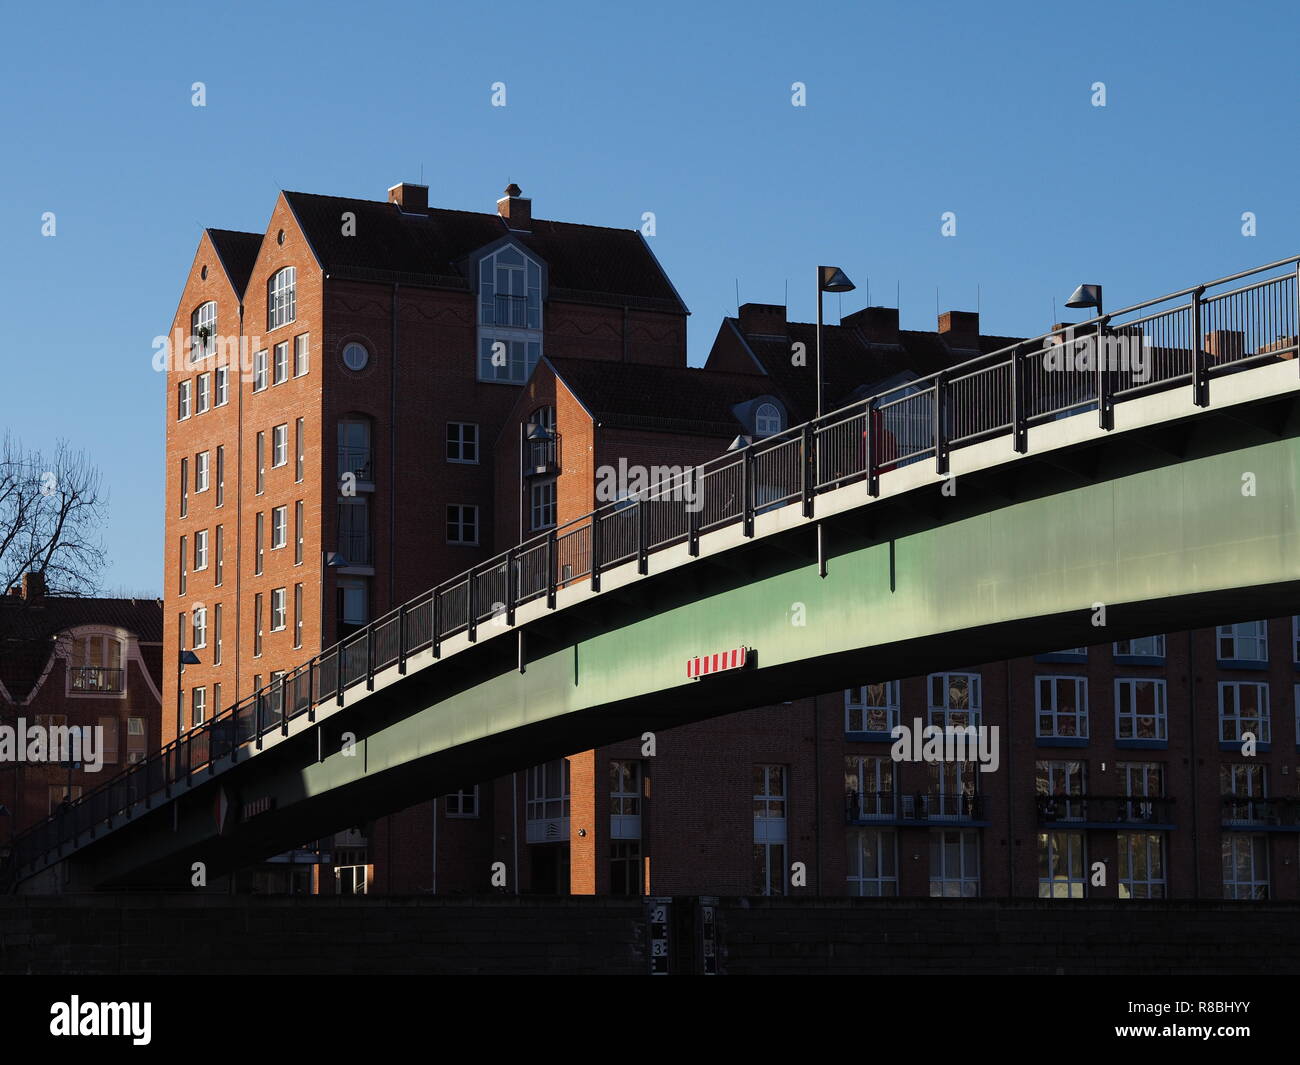 Bremen, Germany - Steel bridge across the river Weser leading to the Teerhof peninsula with red brick buildings in the background under a clear blue s Stock Photo